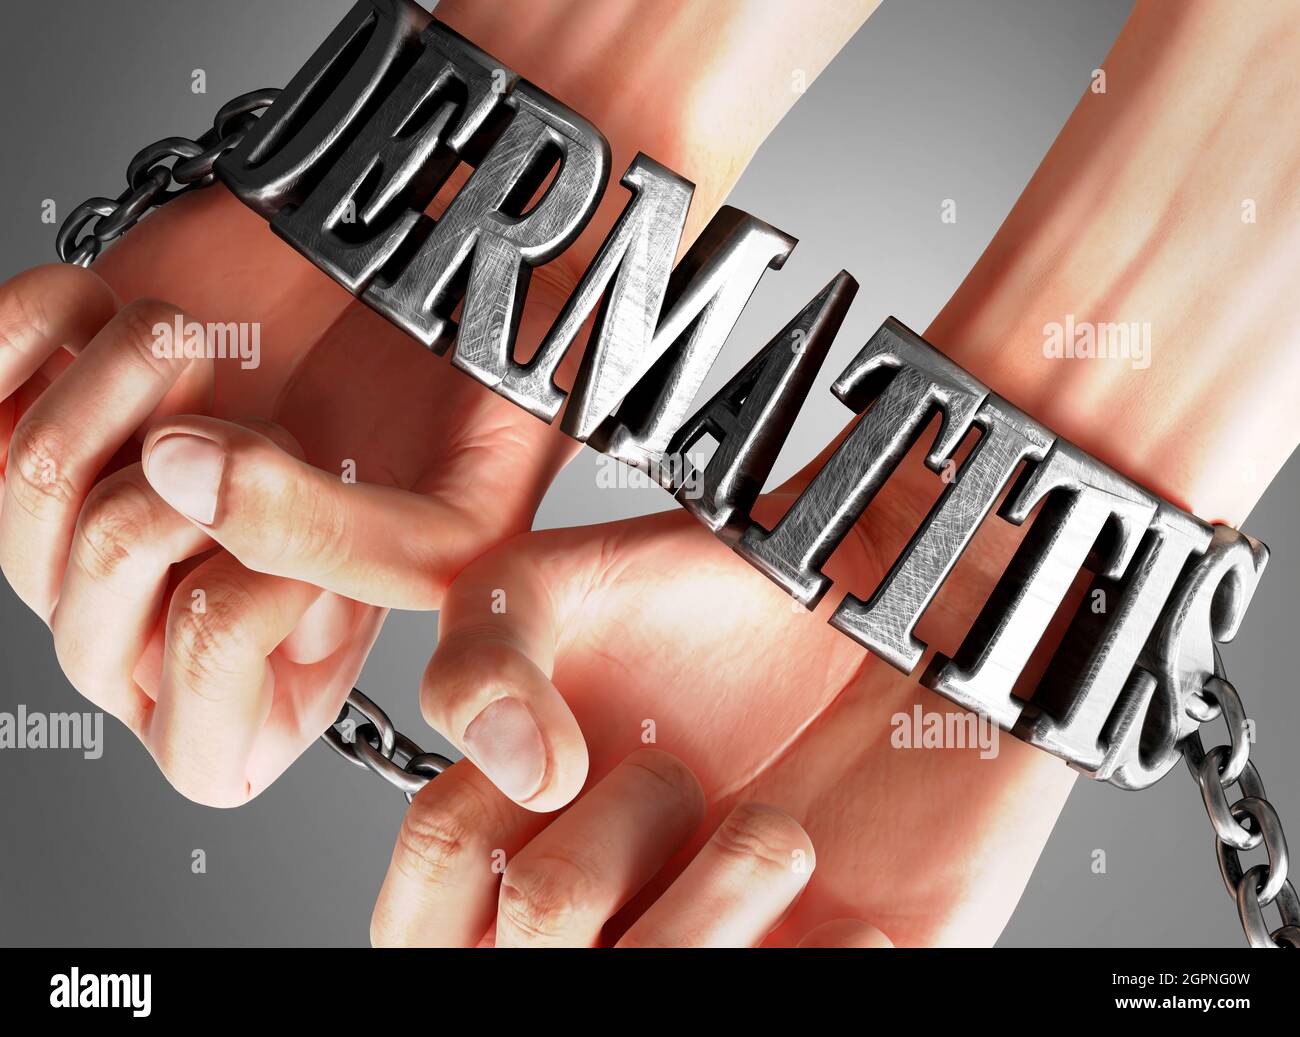 Social impact and influence of dermatitis - analogy showing human hands in chains with a word dermatitis as a symbol of its burden and misery it bring Stock Photo